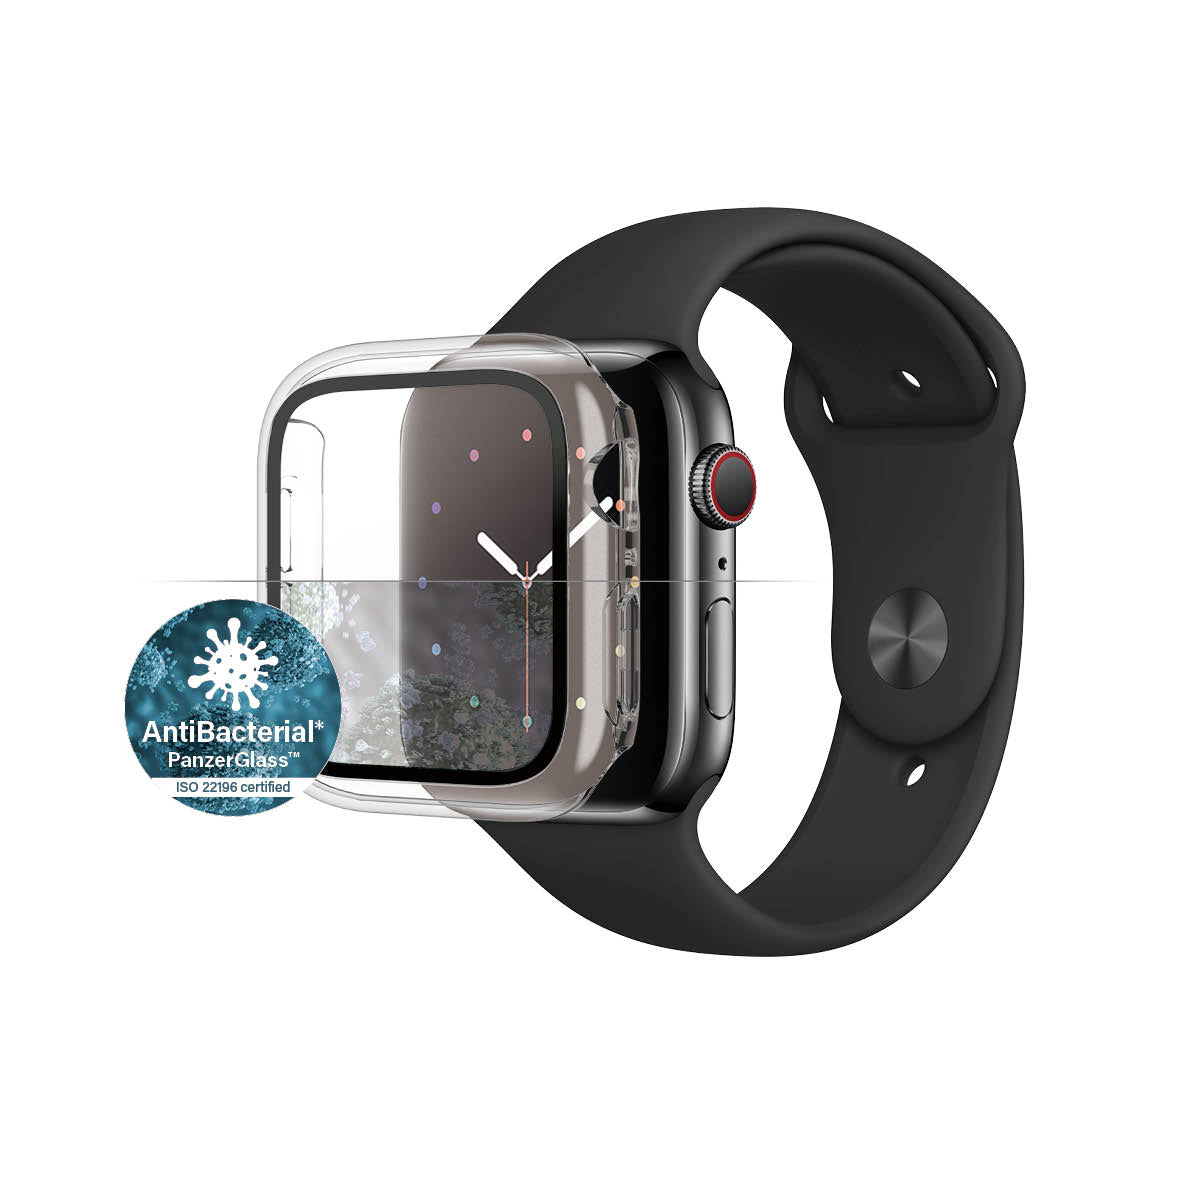 [OPEN BOX] PANZERGLASS Apple Watch 4/5/6/SE 44mm Screen Protector - Full Body Coverage w/ AntiMicrobial - Clear Frame